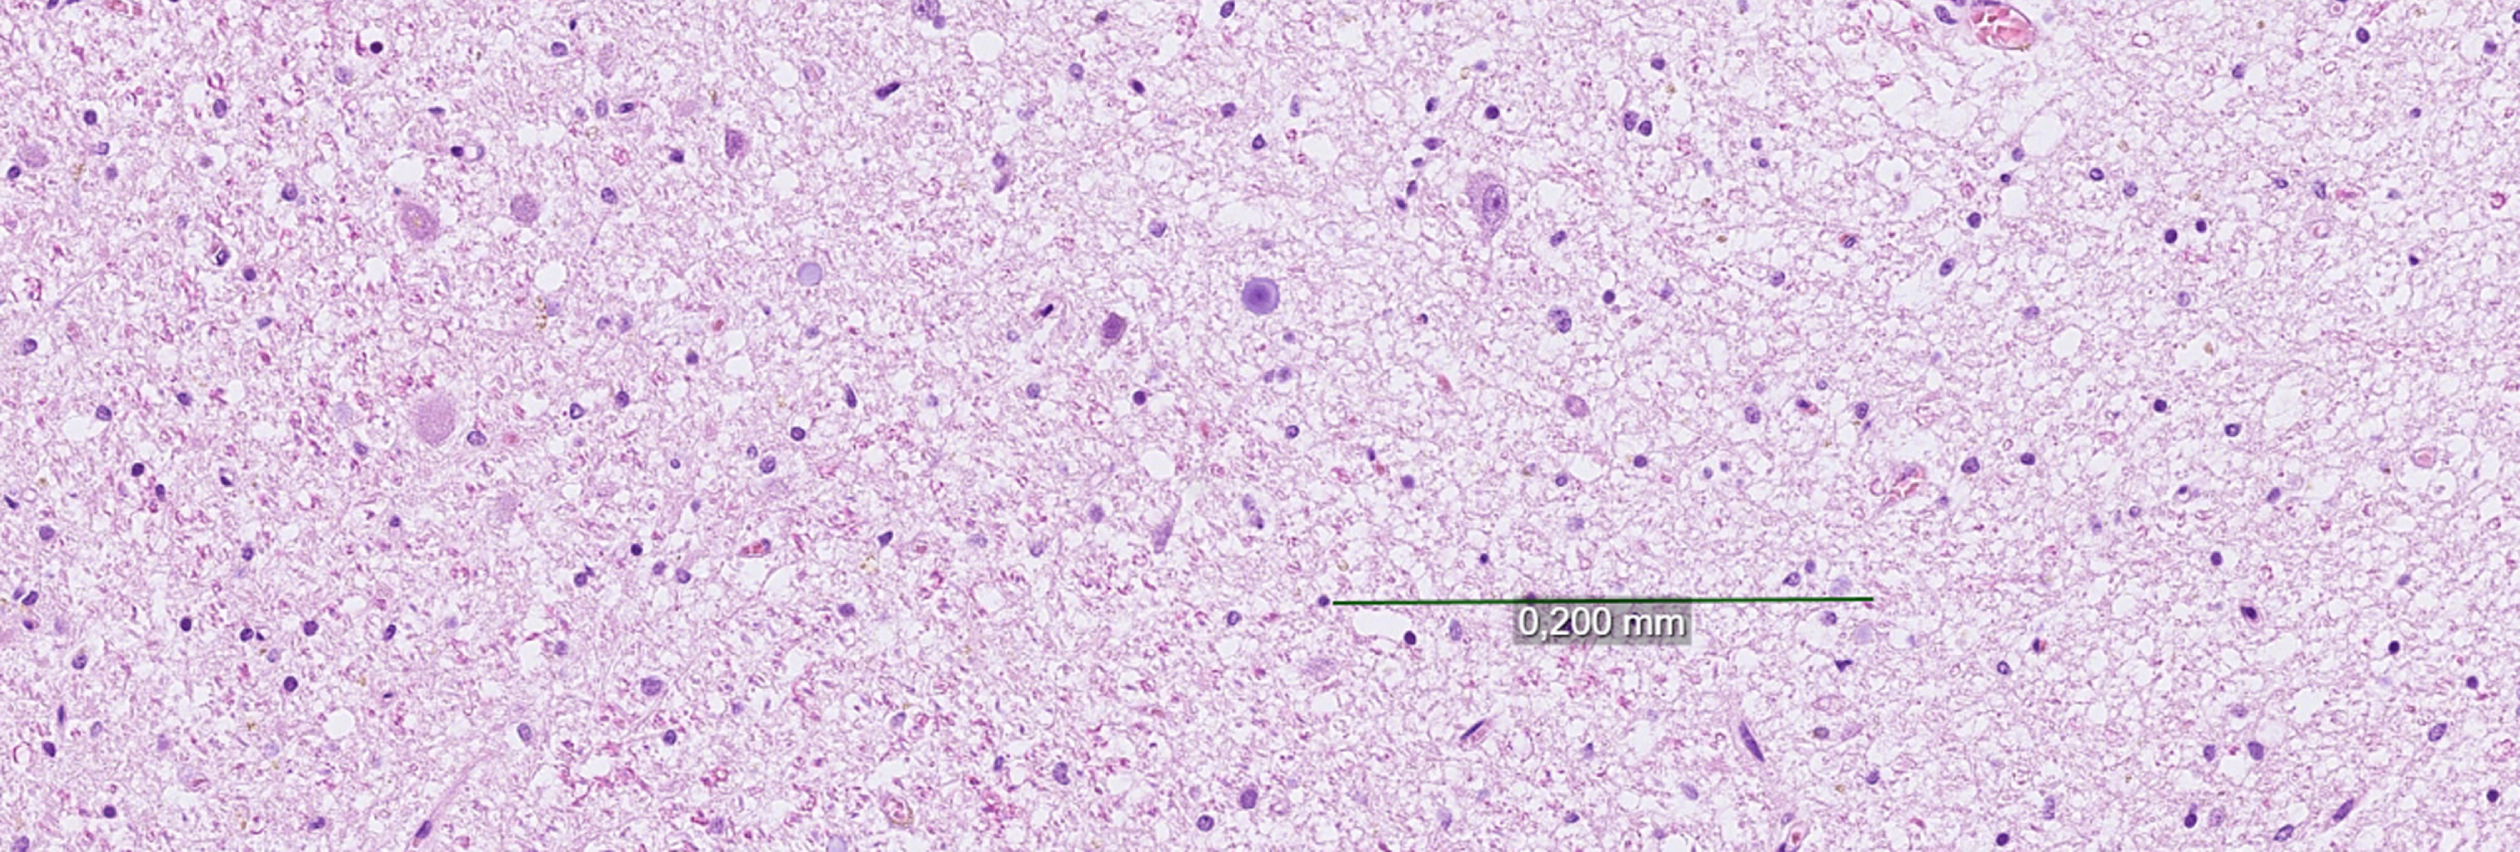 Example image of the locus coeruleus (LC) in neuropathological case diagnosed with frontotemporal lobar degeneration (FTLD) with tau proteinopathy at 13x magnification. Demonstrated in the image is a degenerated LC with a degeneration score of 9 points of 9 possible according to assessment tool introduced in the study. Scale bar representing 0.2 mm.